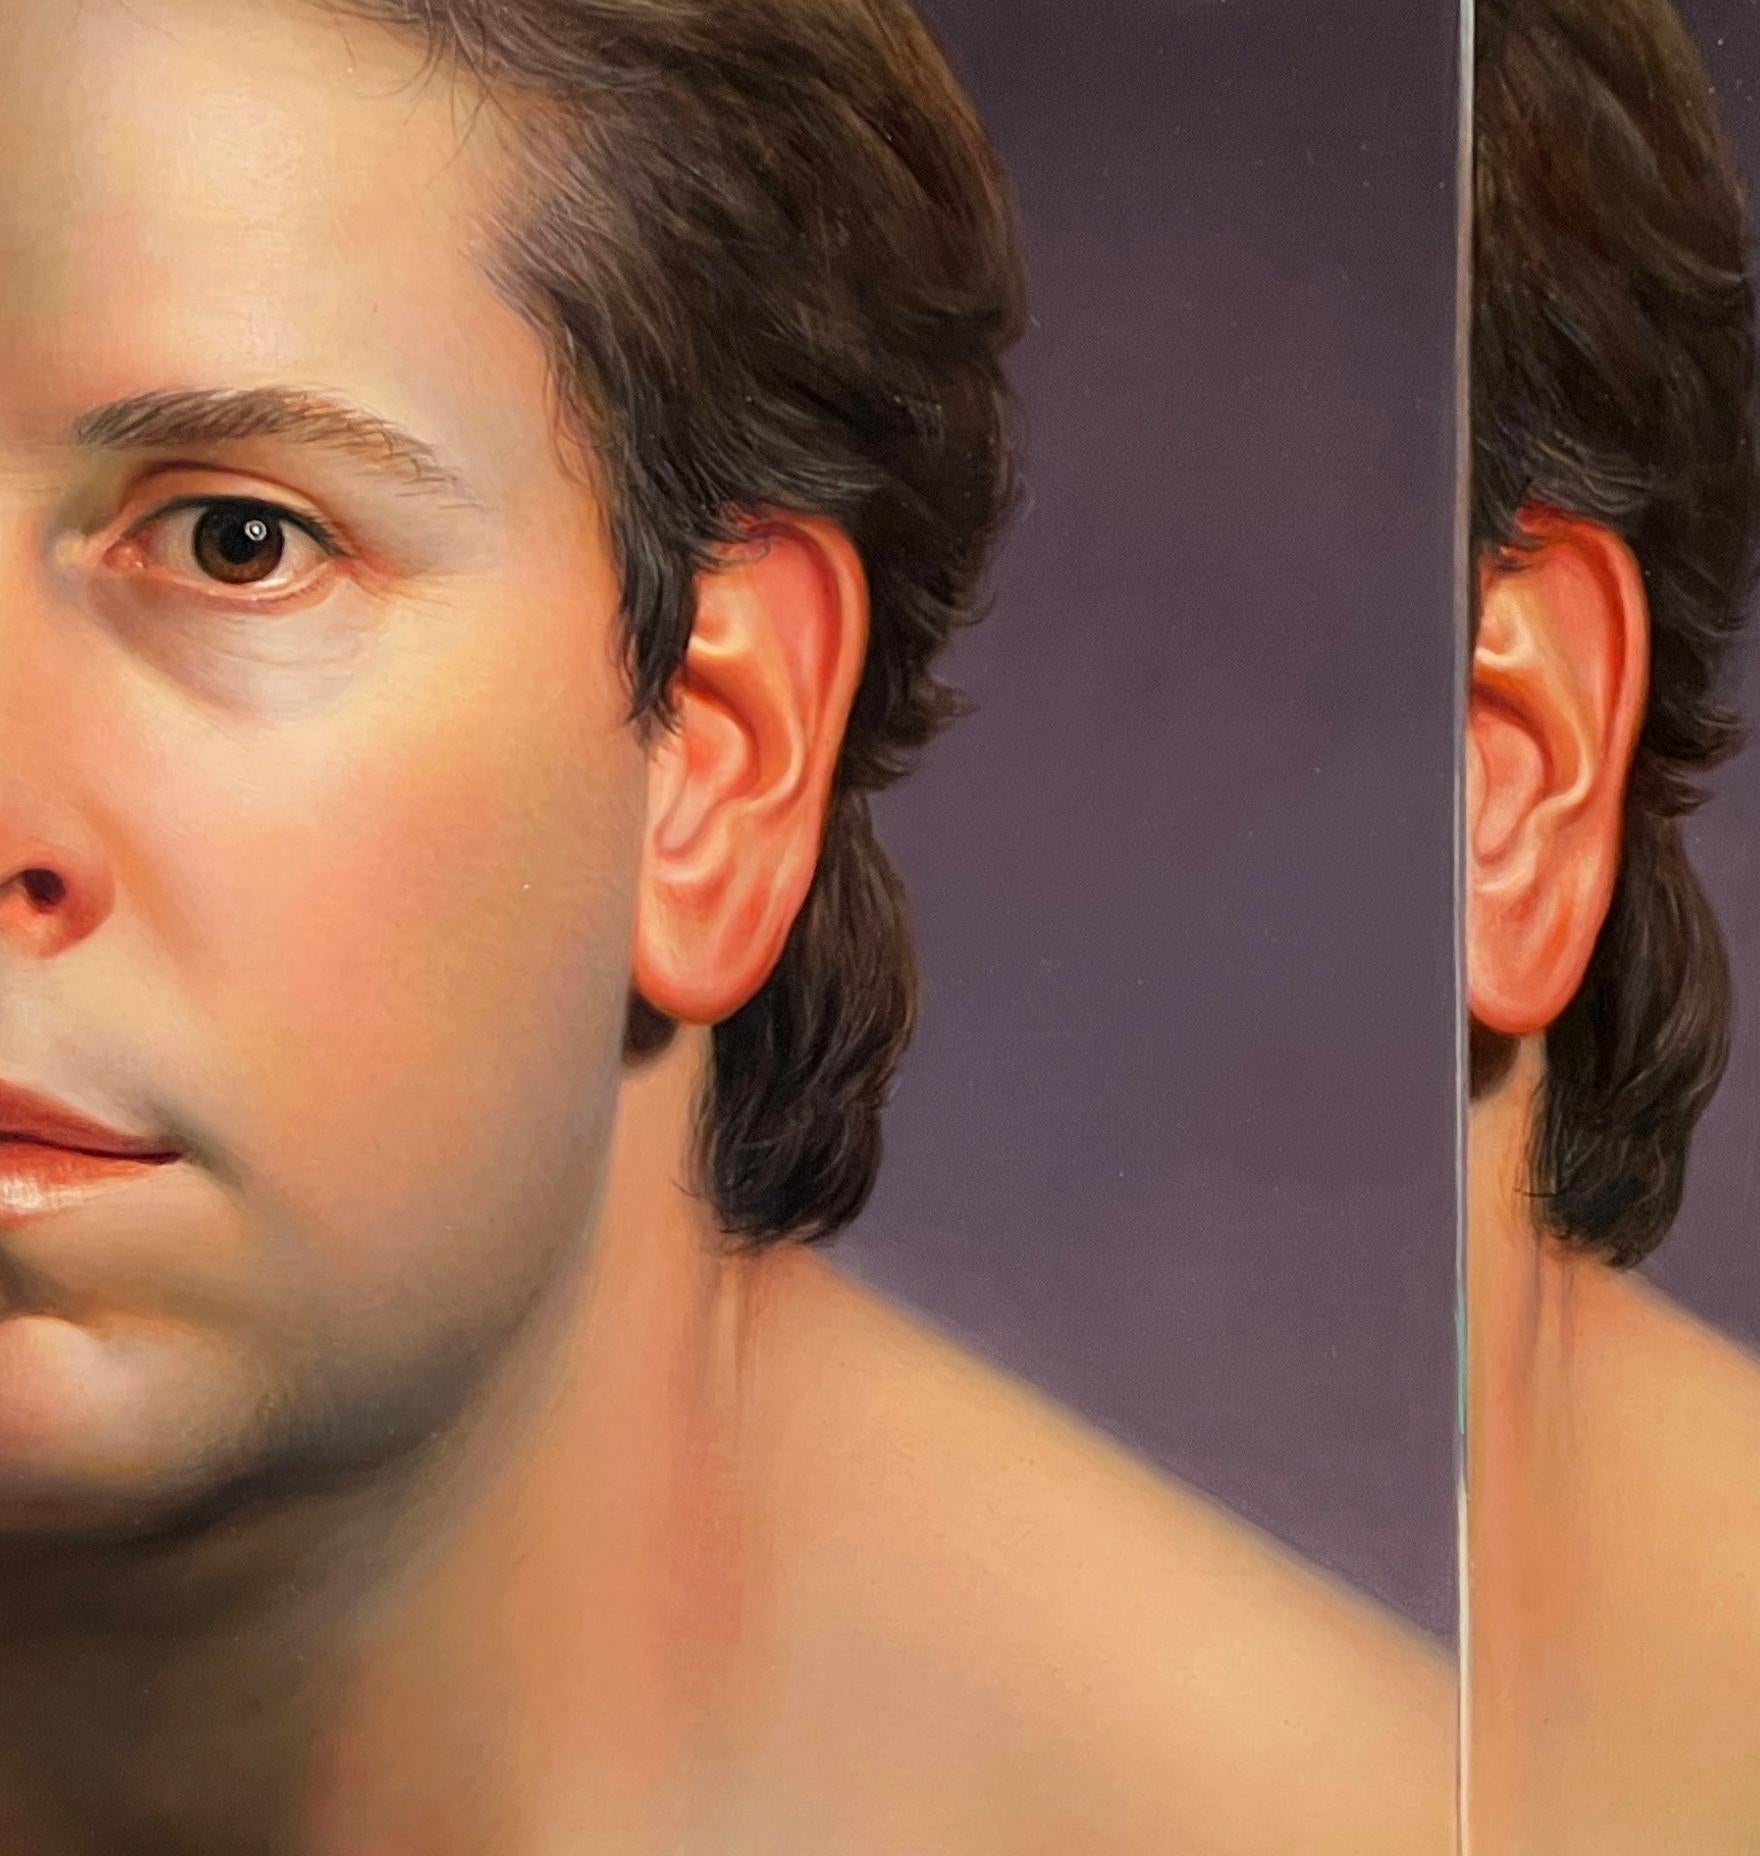 BEVELED - Contemporary Self Portrait / Photorealism / Trompe l'oeil - Black Portrait Painting by Will Wilson